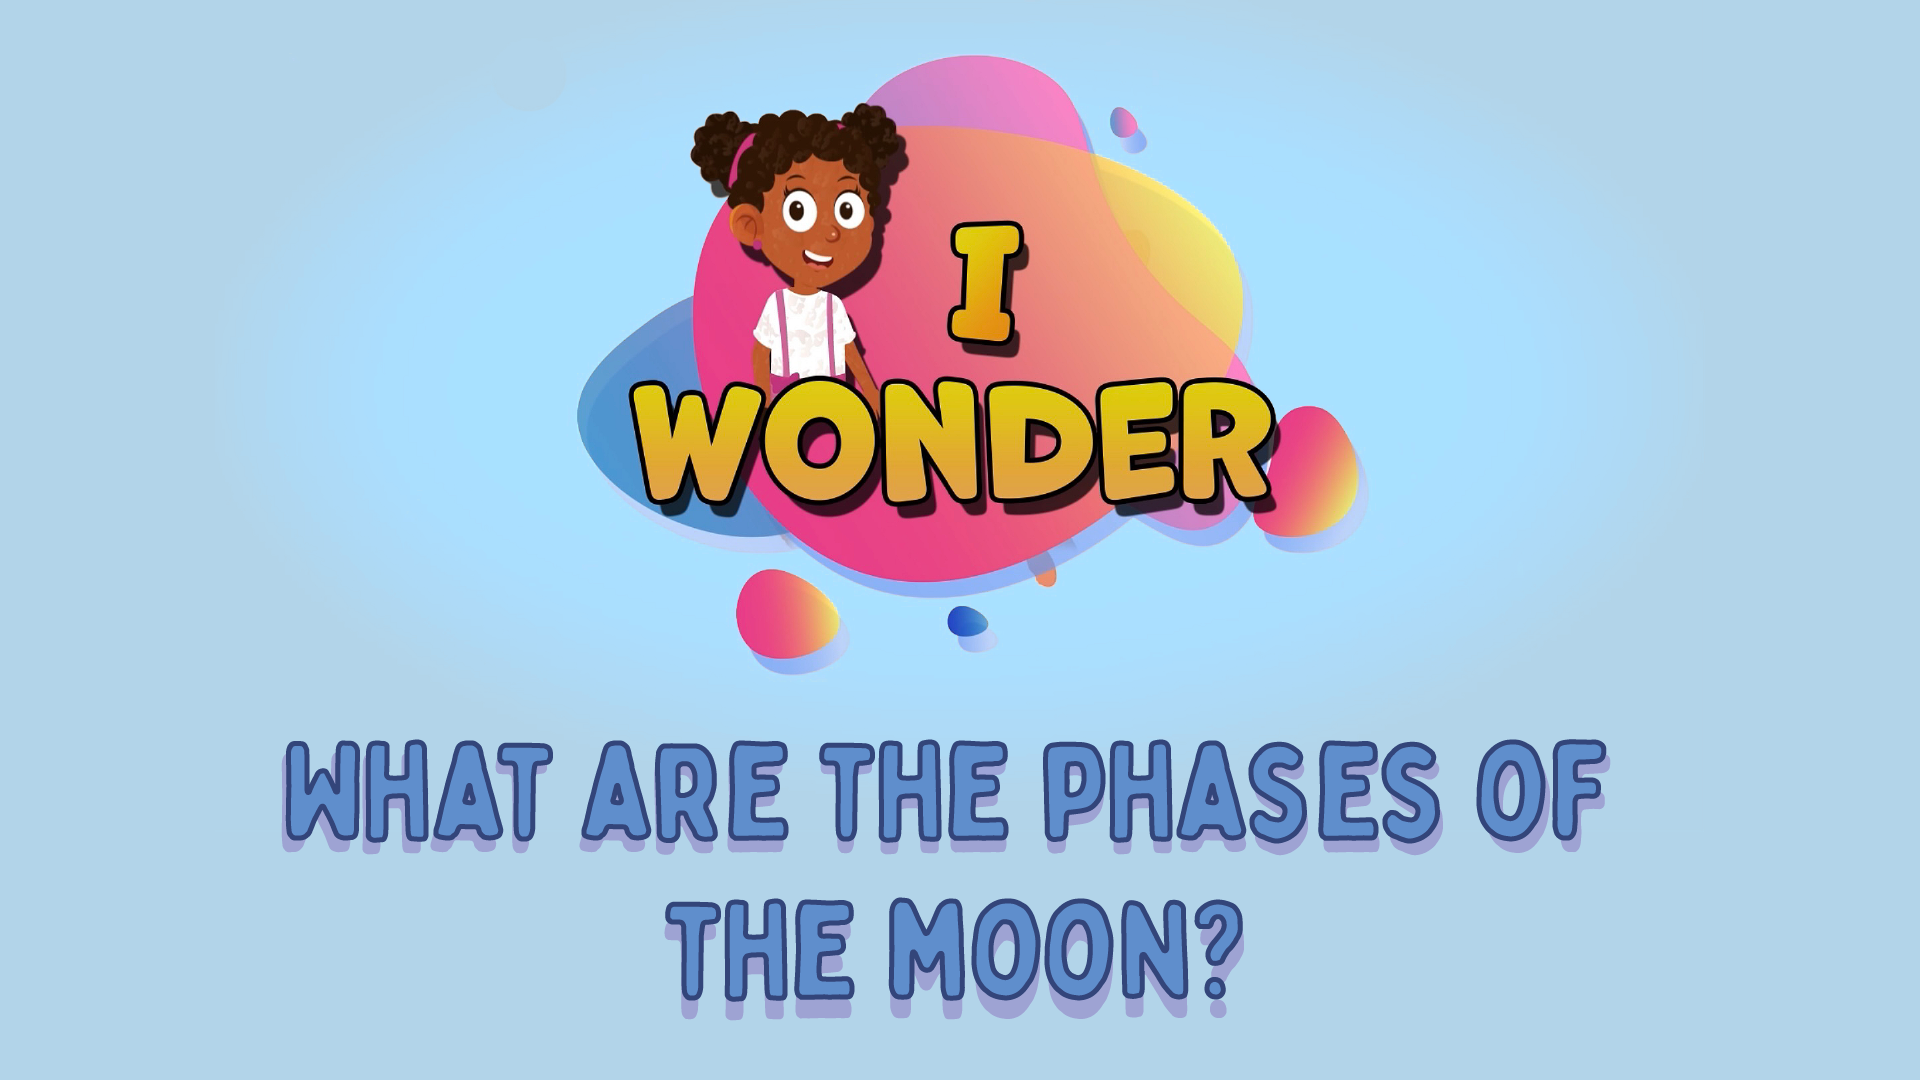 What Are The Phases Of The Moon?